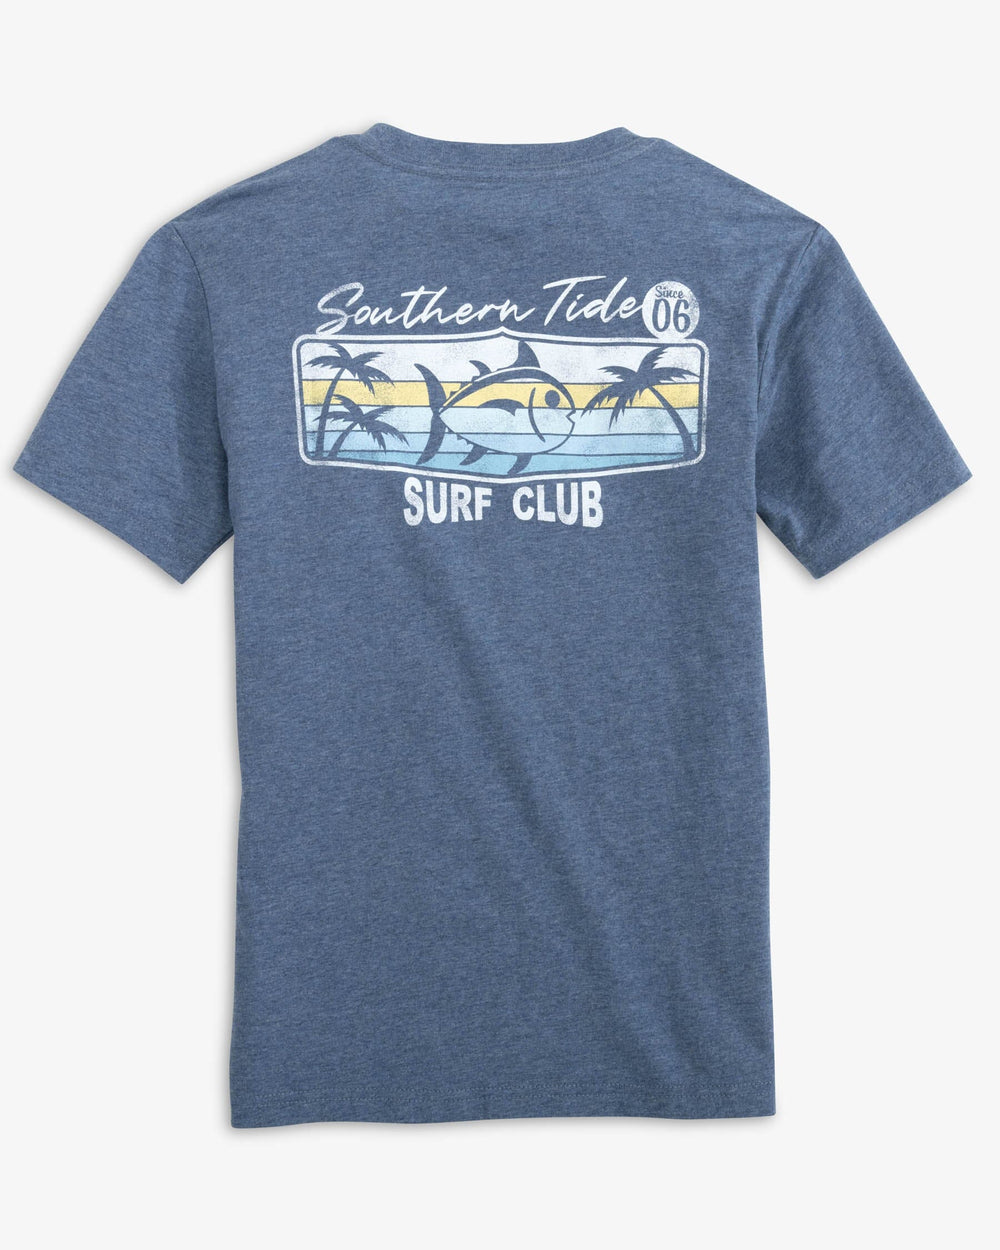 The back view of the Southern Tide Kid's Surf Club 06 Heather T-shirt by Southern Tide - Heather Ensign Blue